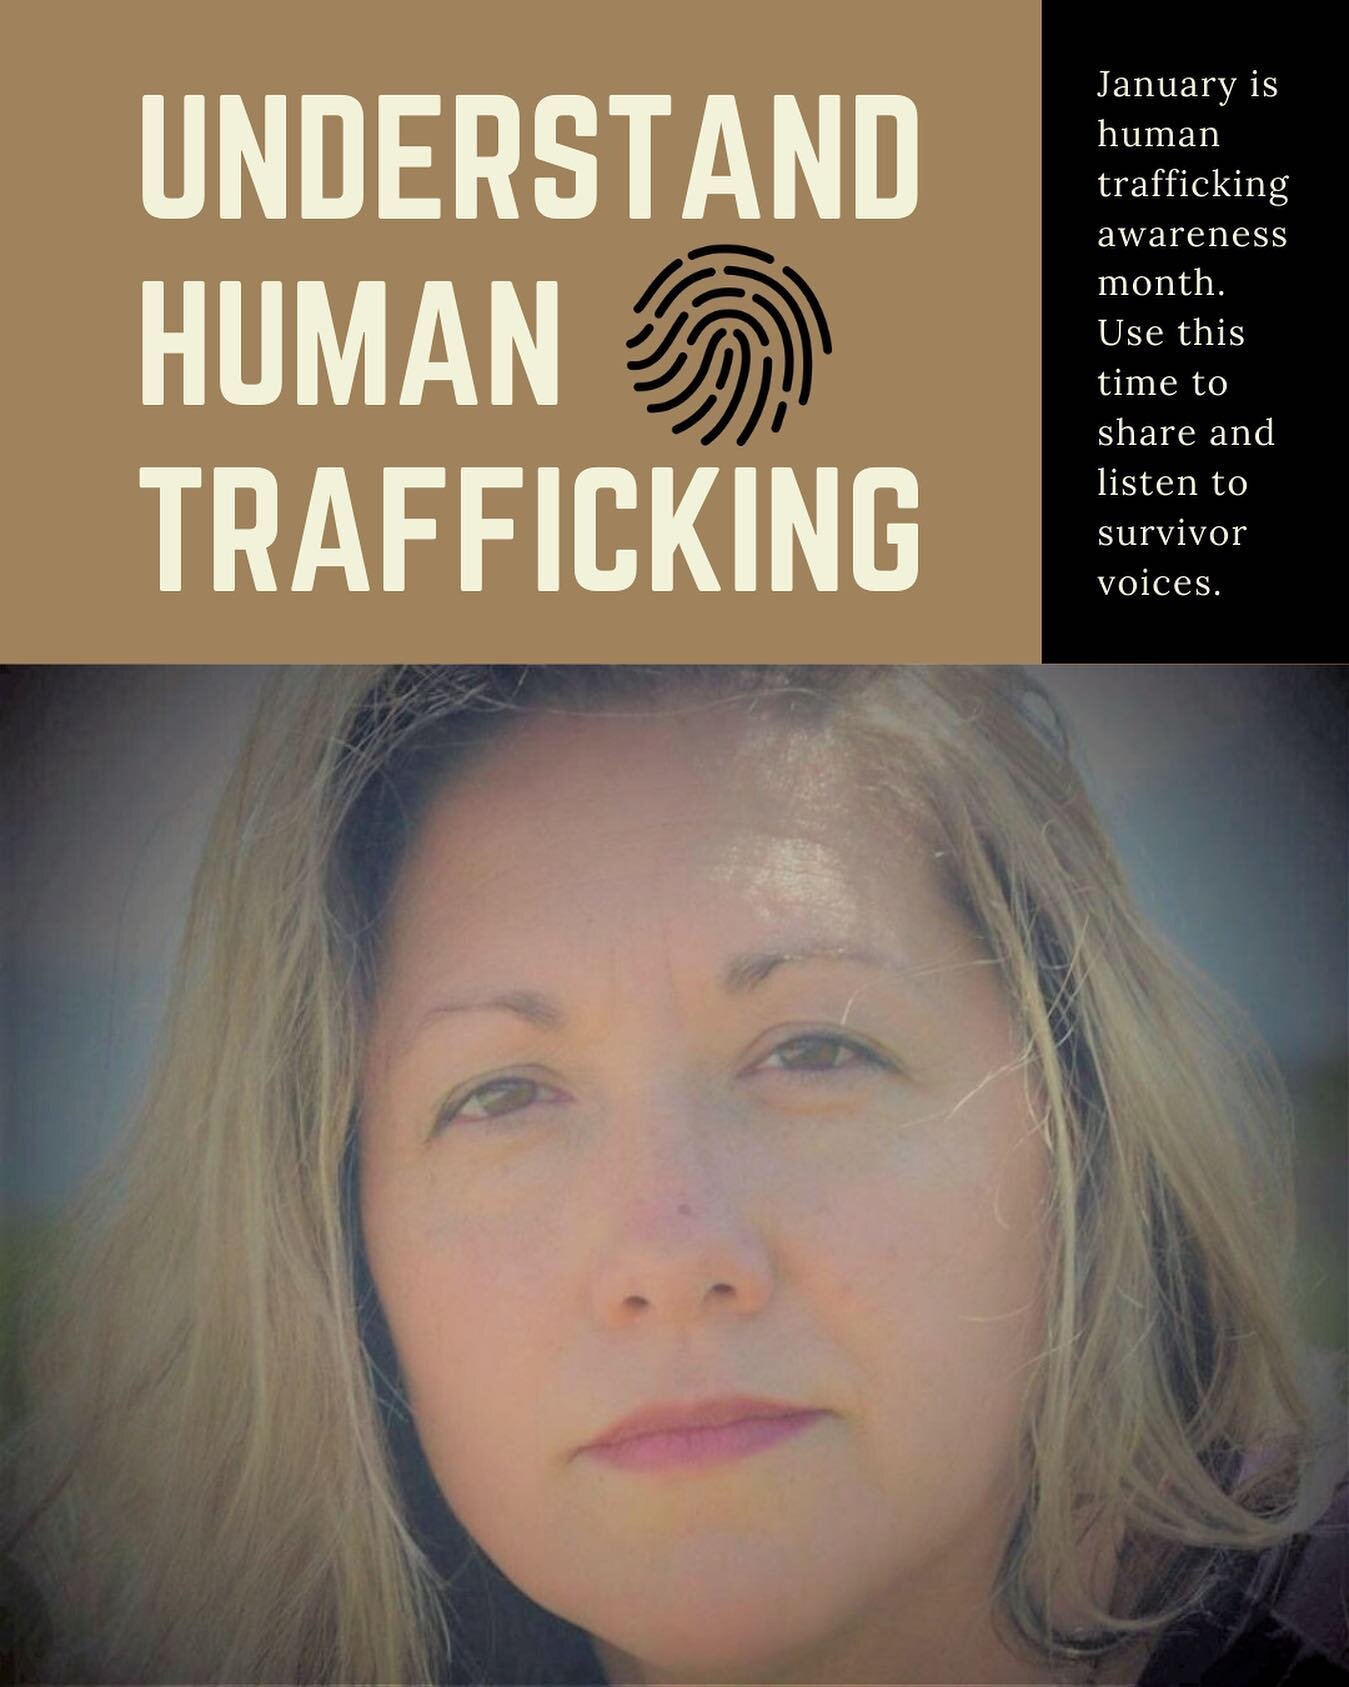 January is human trafficking awareness month. We encourage you to use this time to share and listen to survivor voices.

Let me introduce you to Stephanie Anderson.

Stephanie is a survivor and neurodevelopmental coach. She believes that poetry, art,